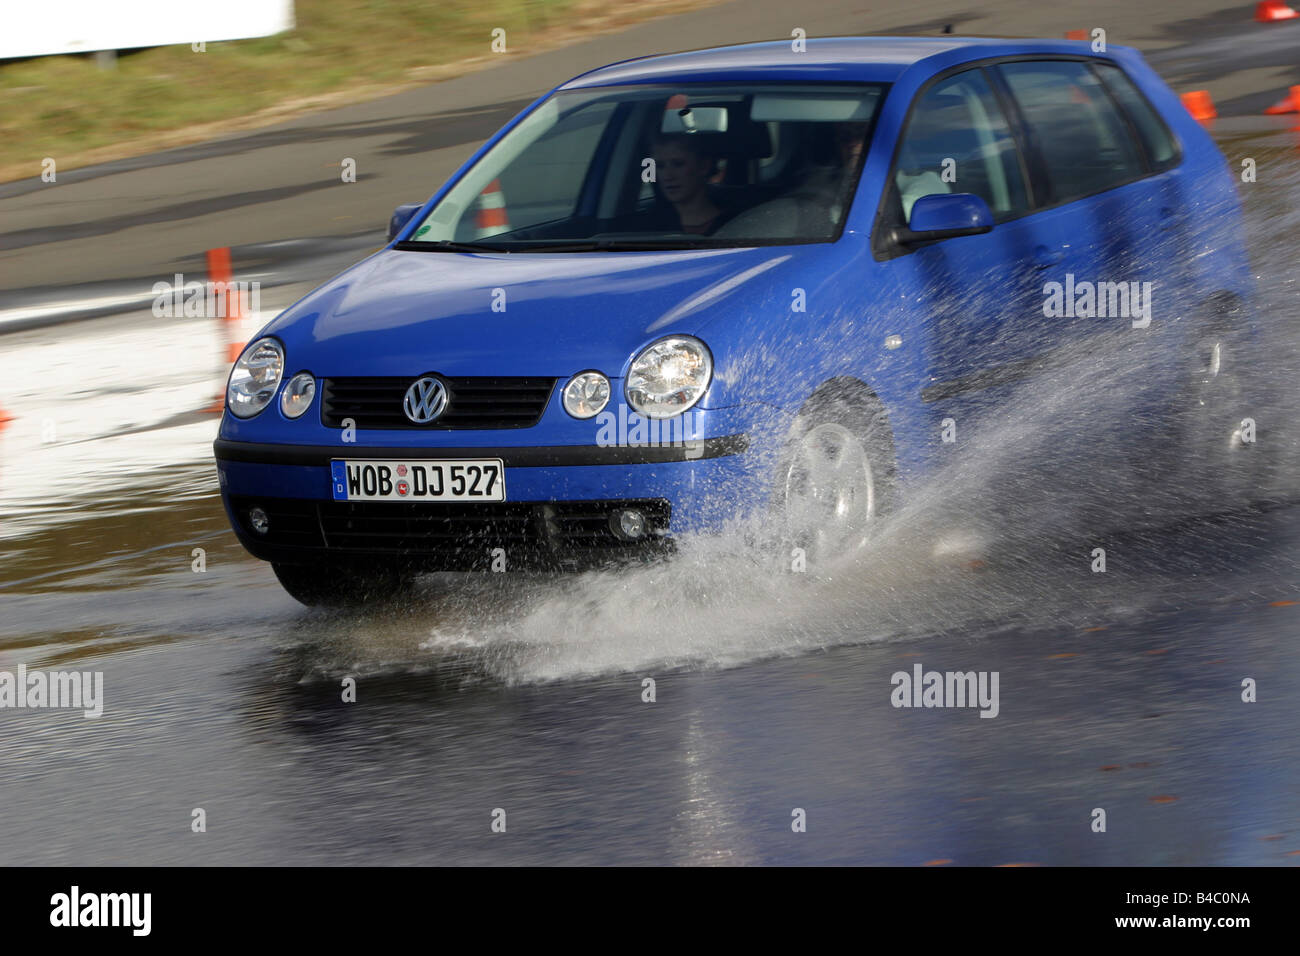 Car, Safe driving training VW Volkswagen Volkswagen Polo, test track,  Water, Aquaplaning, brakes, brake test, Security, moving Stock Photo - Alamy